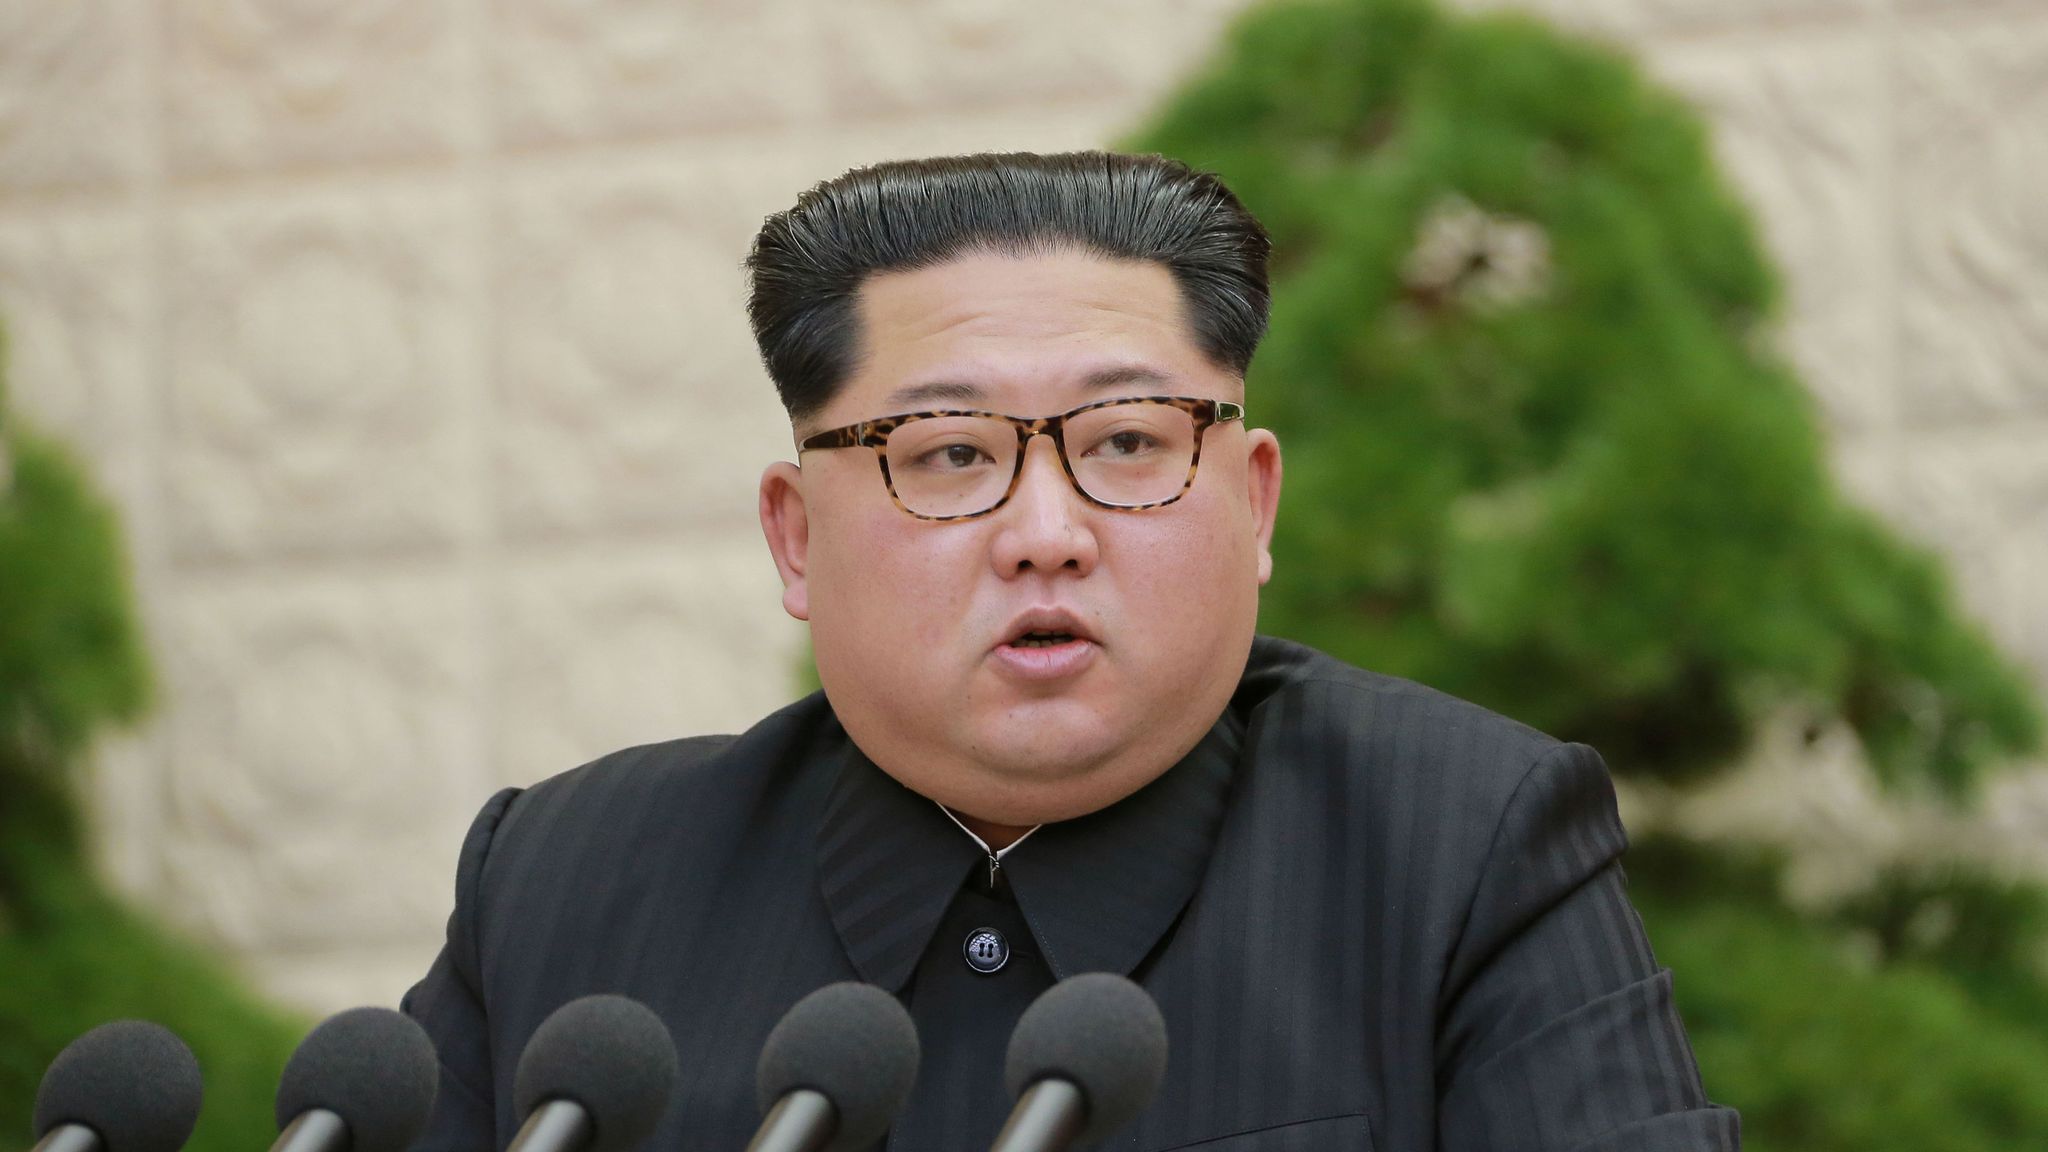 Well, That's a Bummer! North Korean Media Admits That Founder Kim